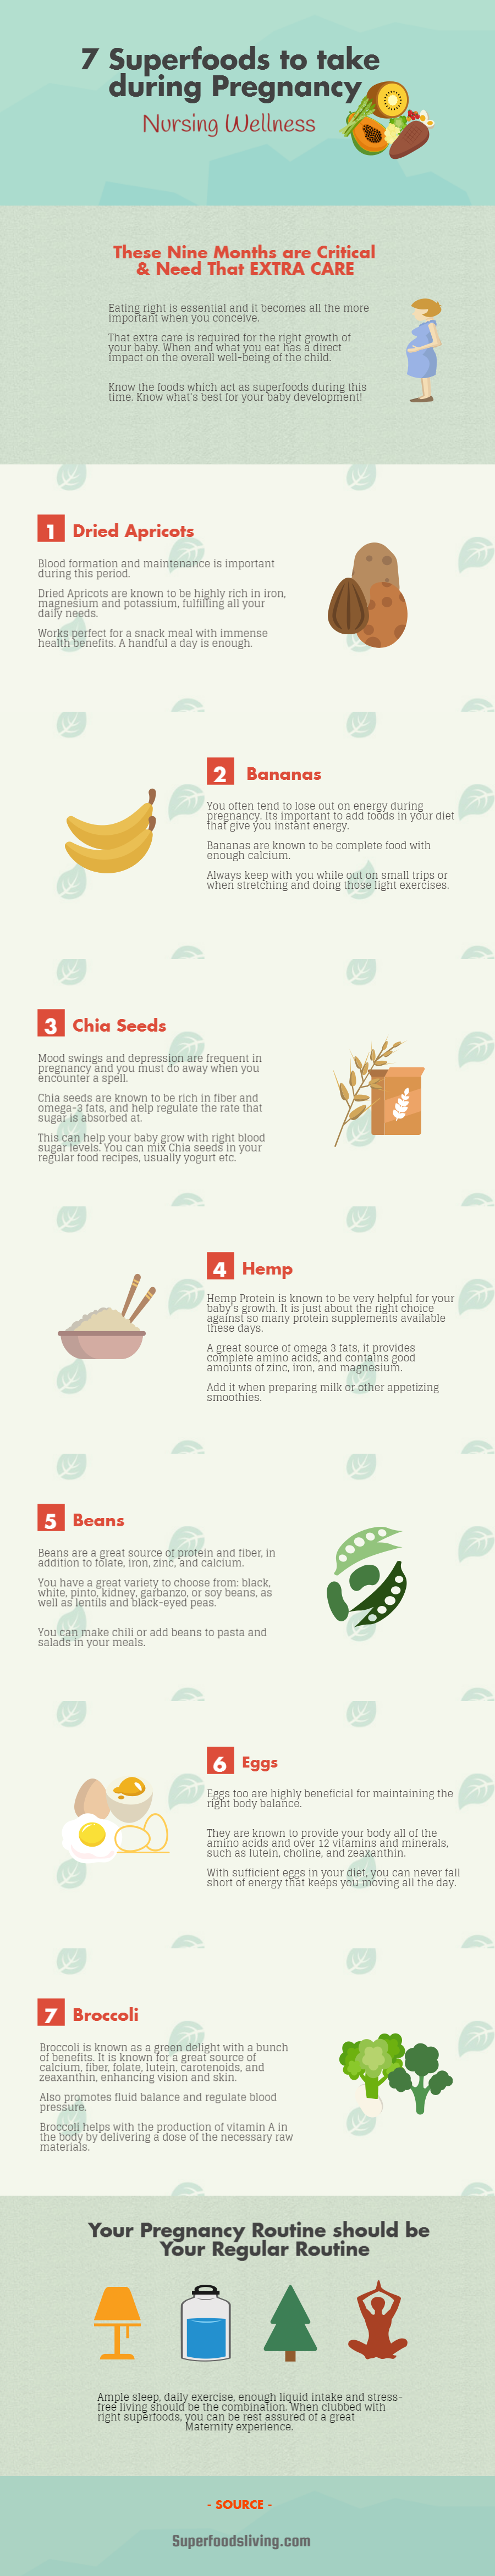 7 Superfoods to take during Pregnancy Infographic